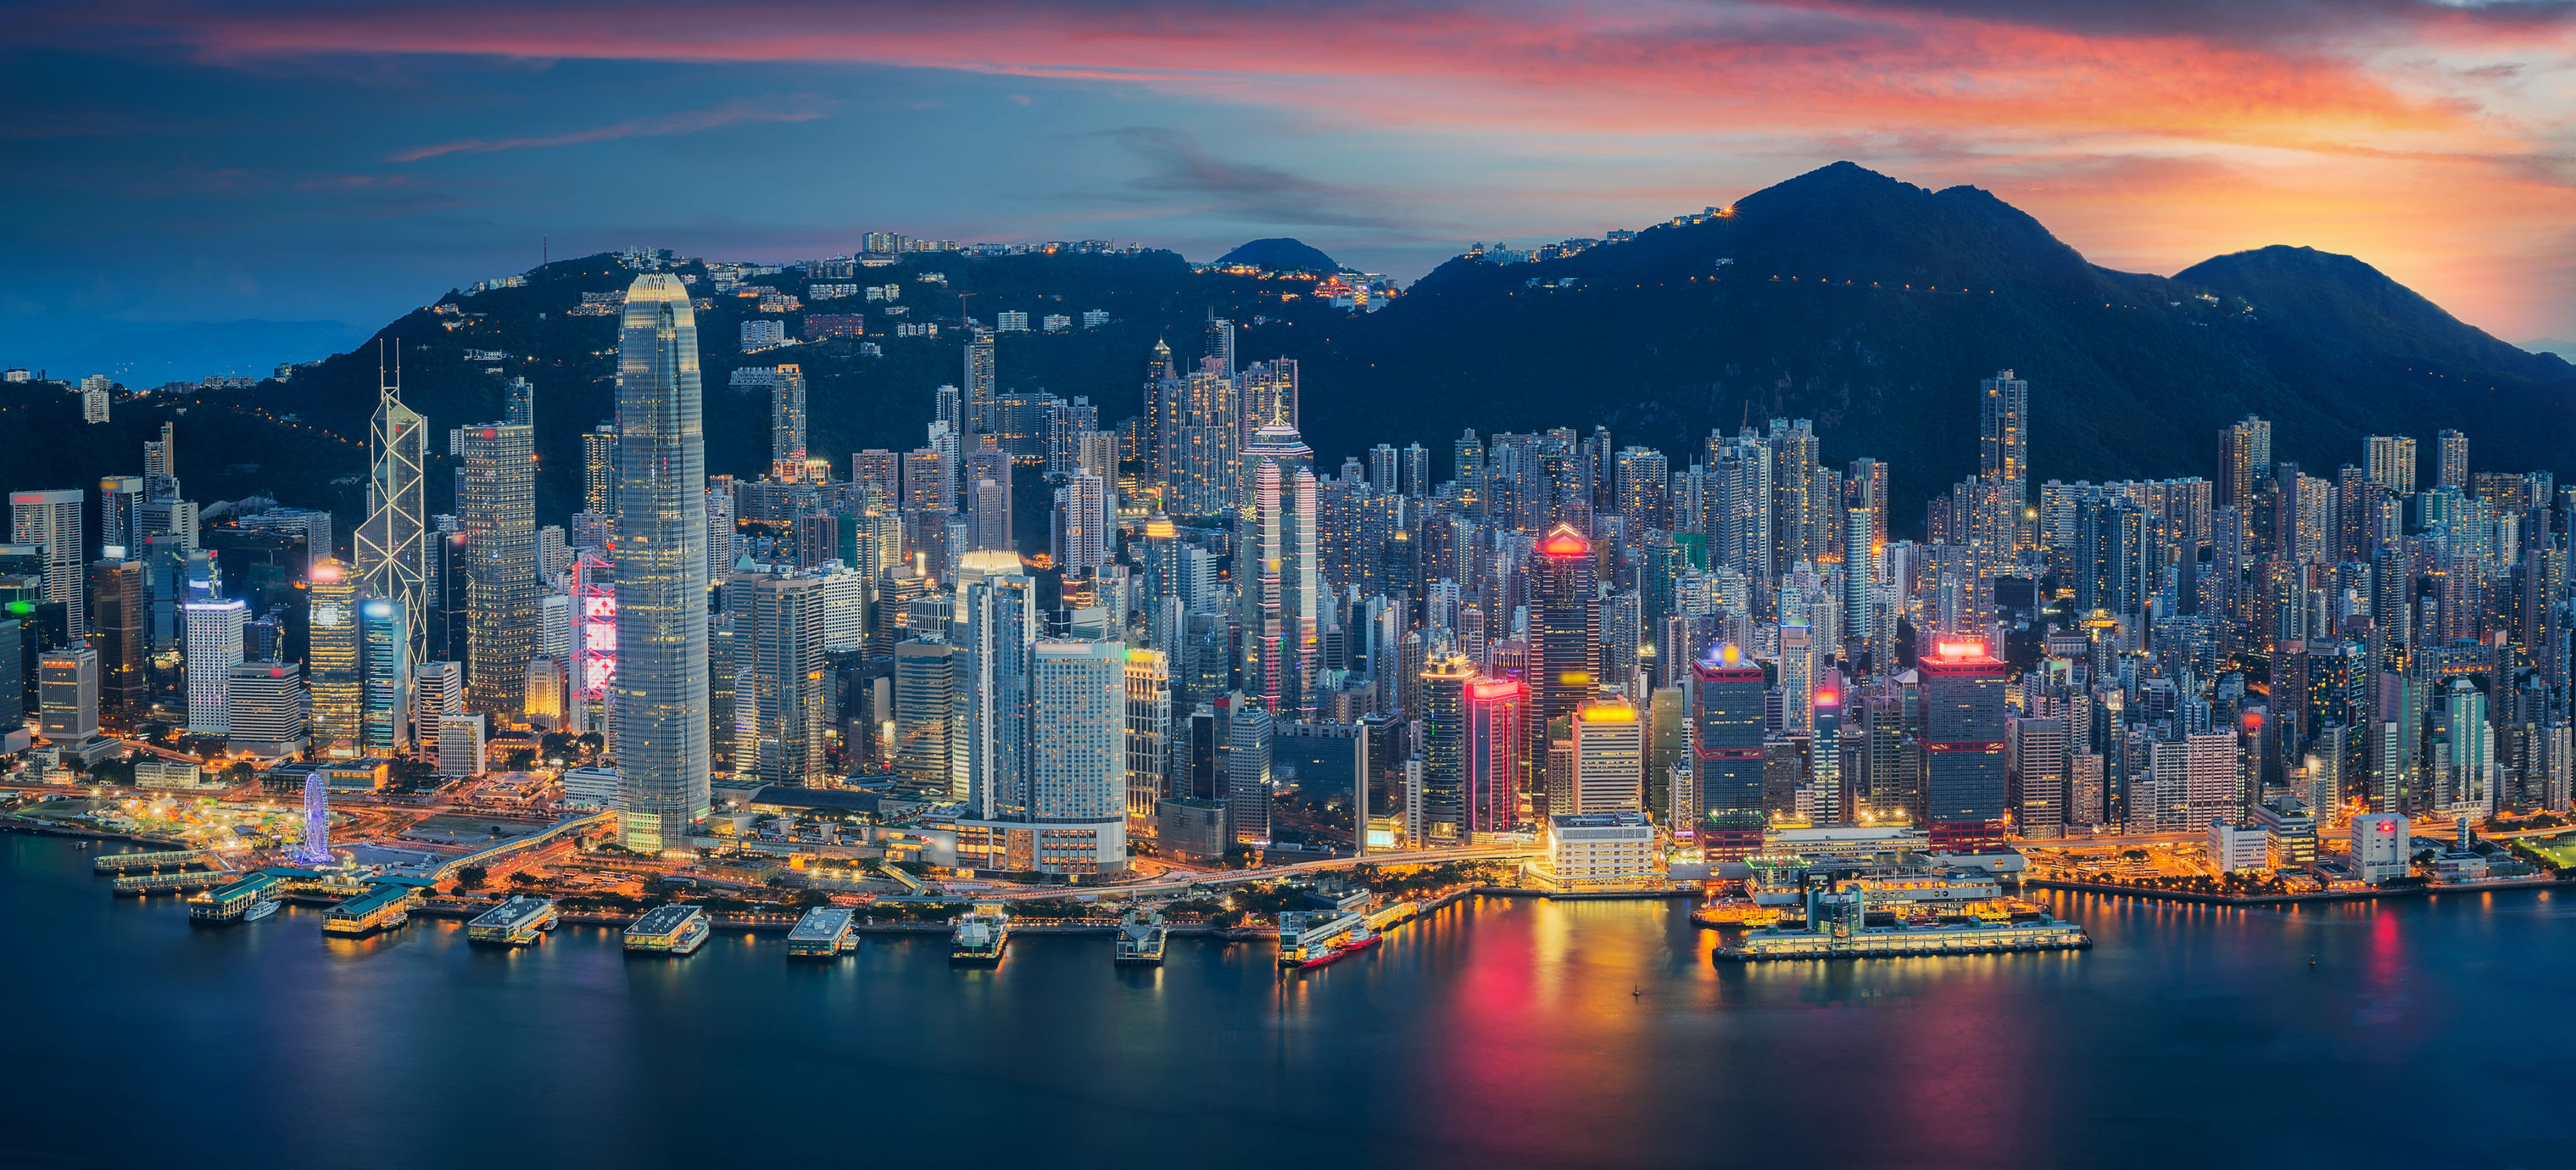 Money Lending In Hong Kong - Pitfalls For Lenders And Protections For Borrowers.